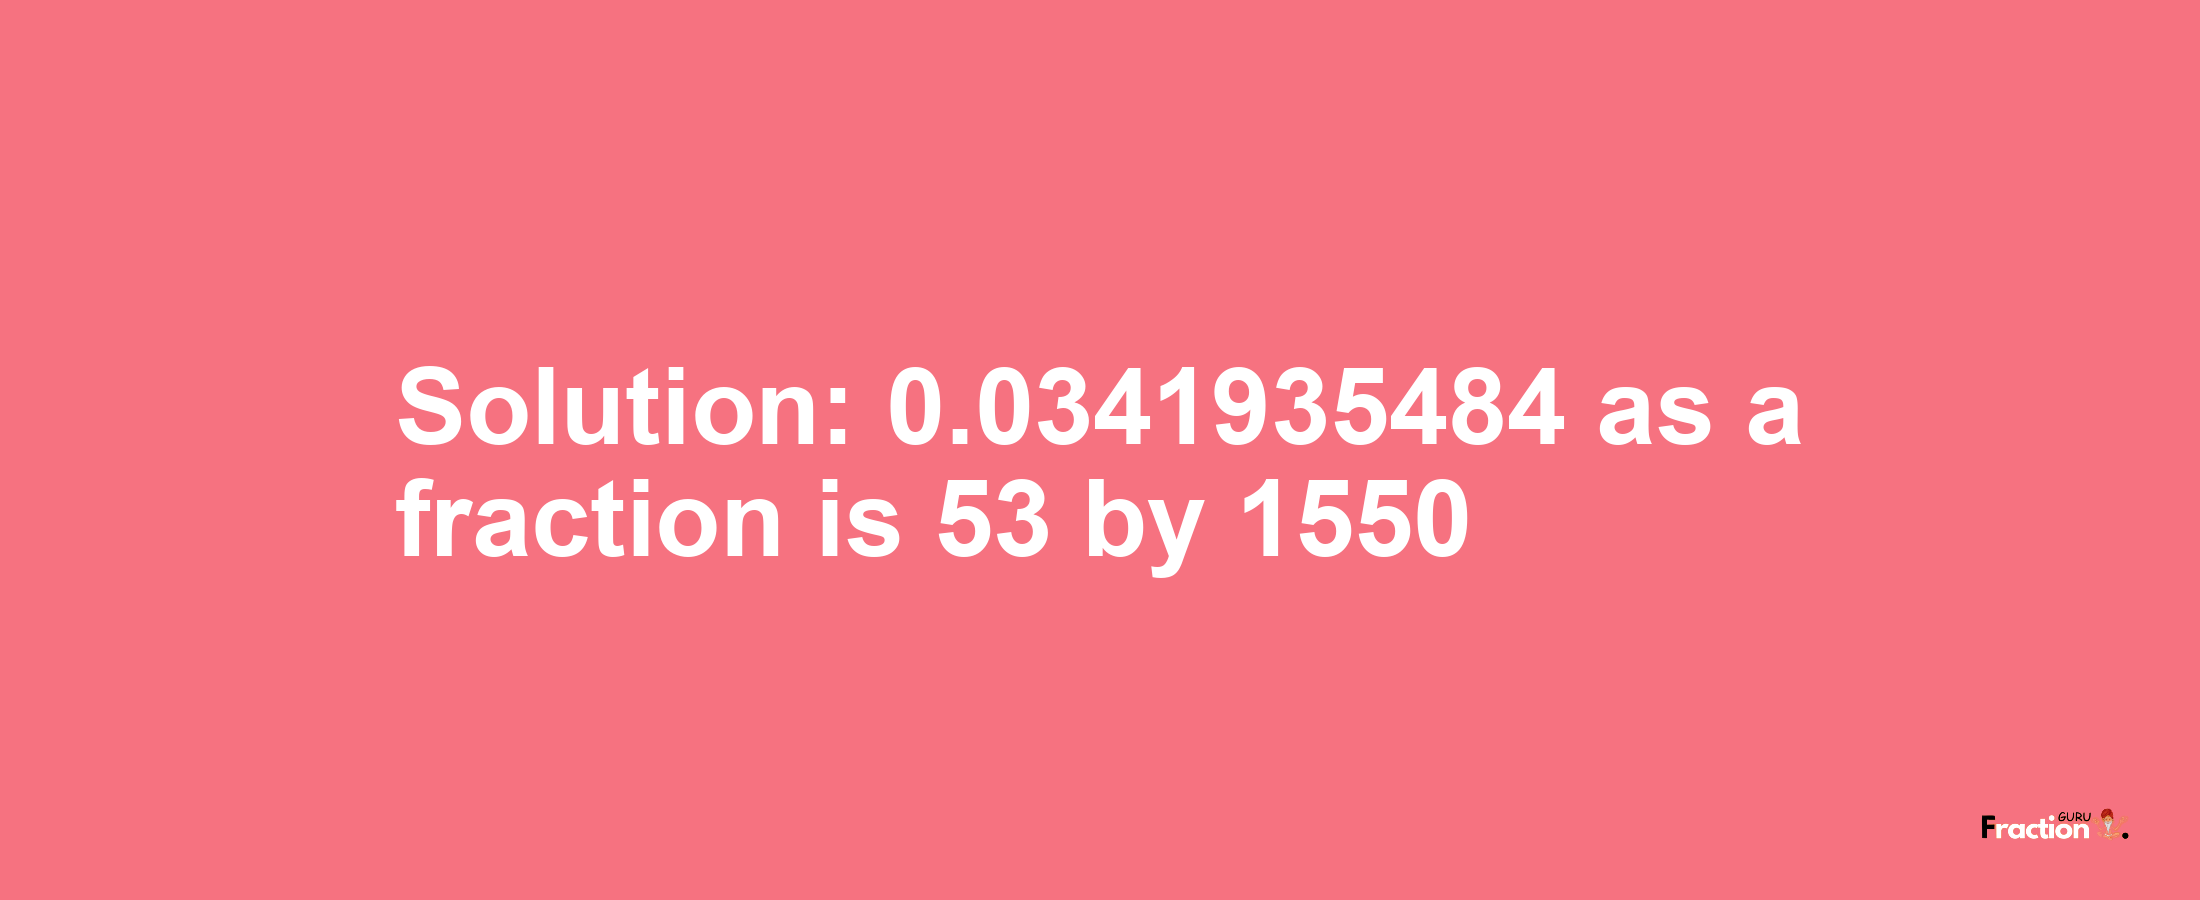 Solution:0.0341935484 as a fraction is 53/1550